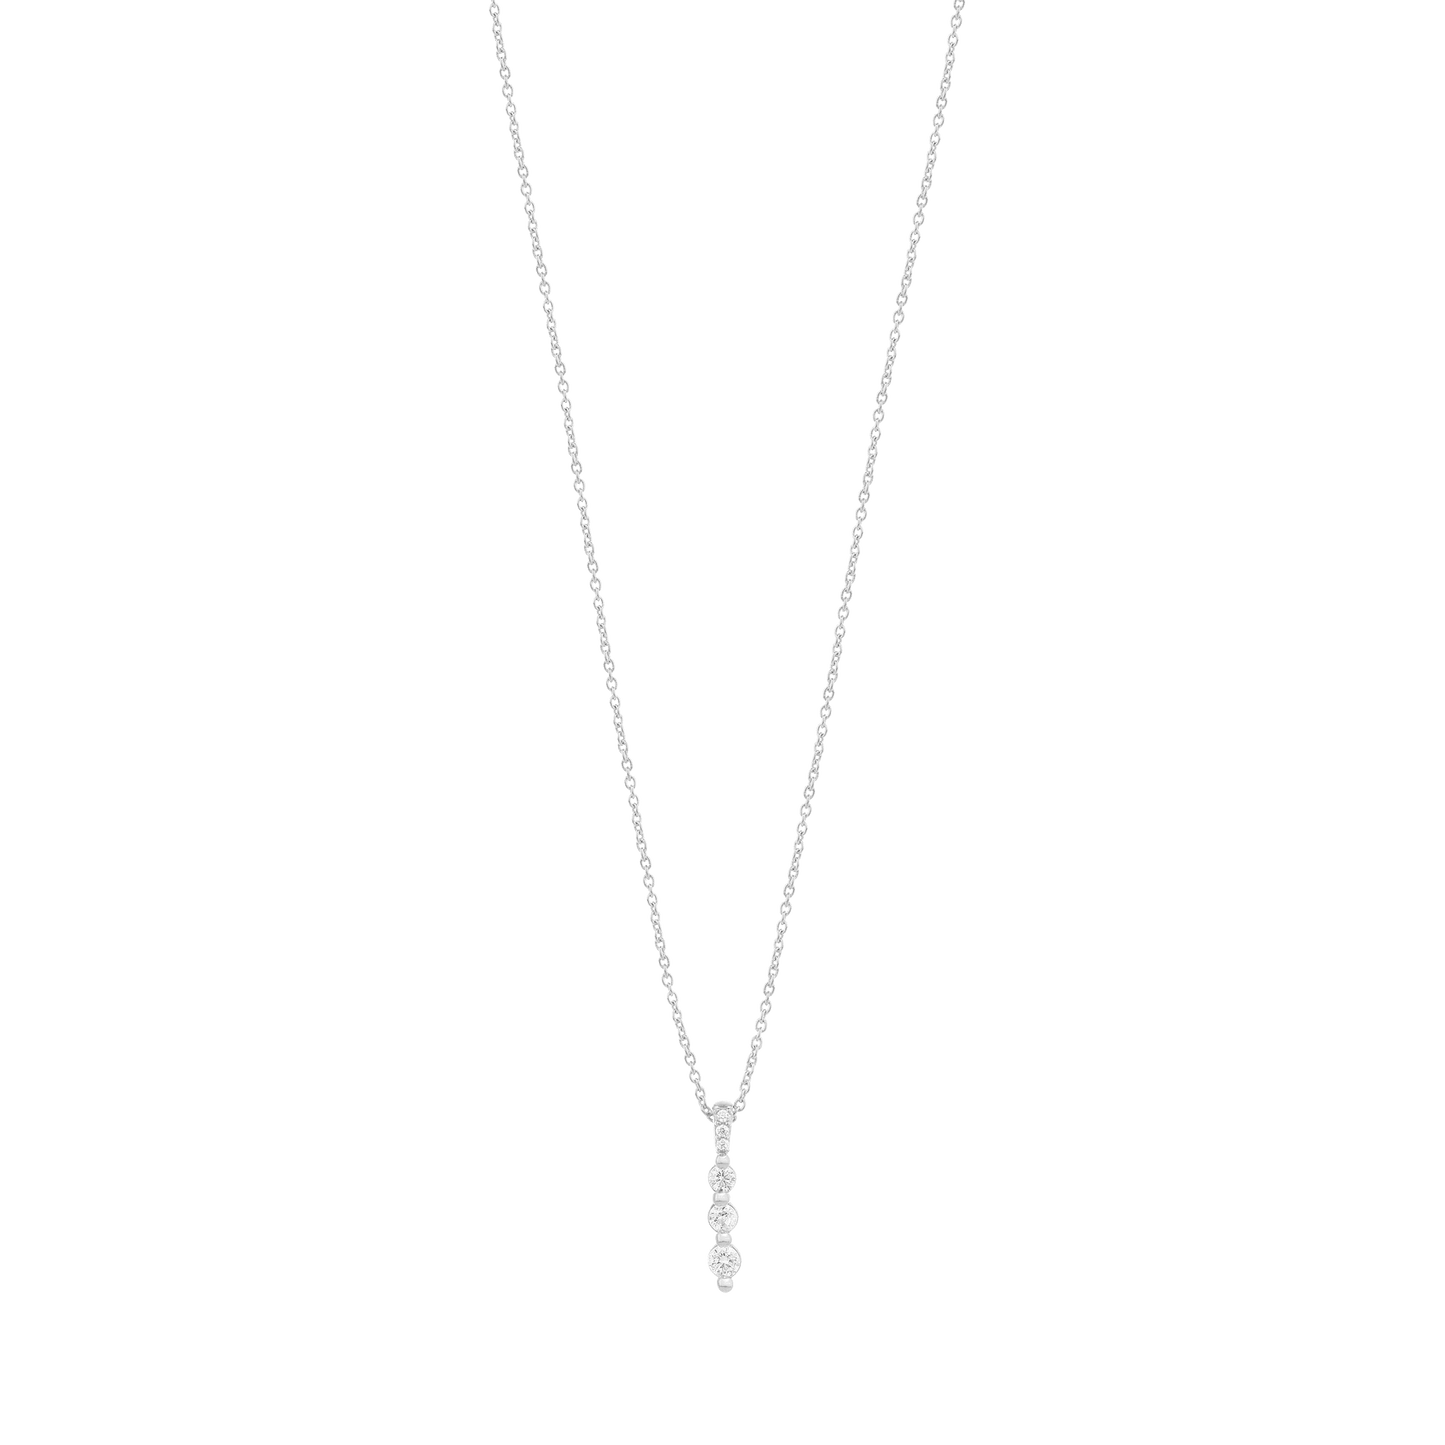 3 Diamonds Bar Necklace - 14K Yellow Gold Necklaces magal-dev 